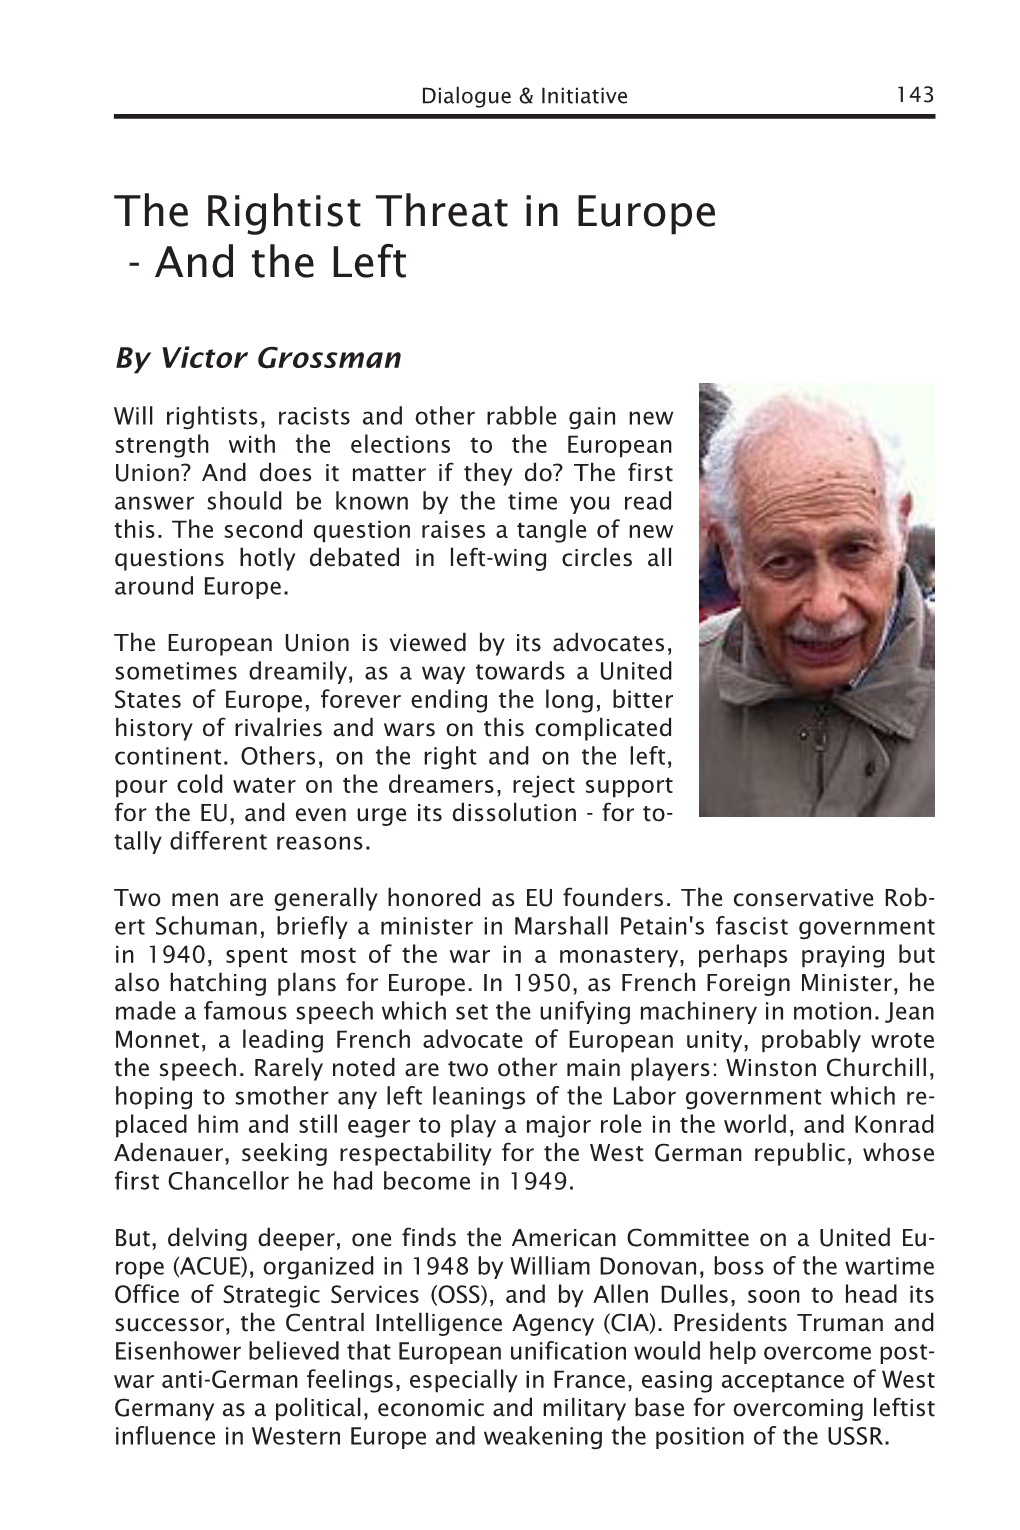 The Rightist Threat in Europe - and the Left